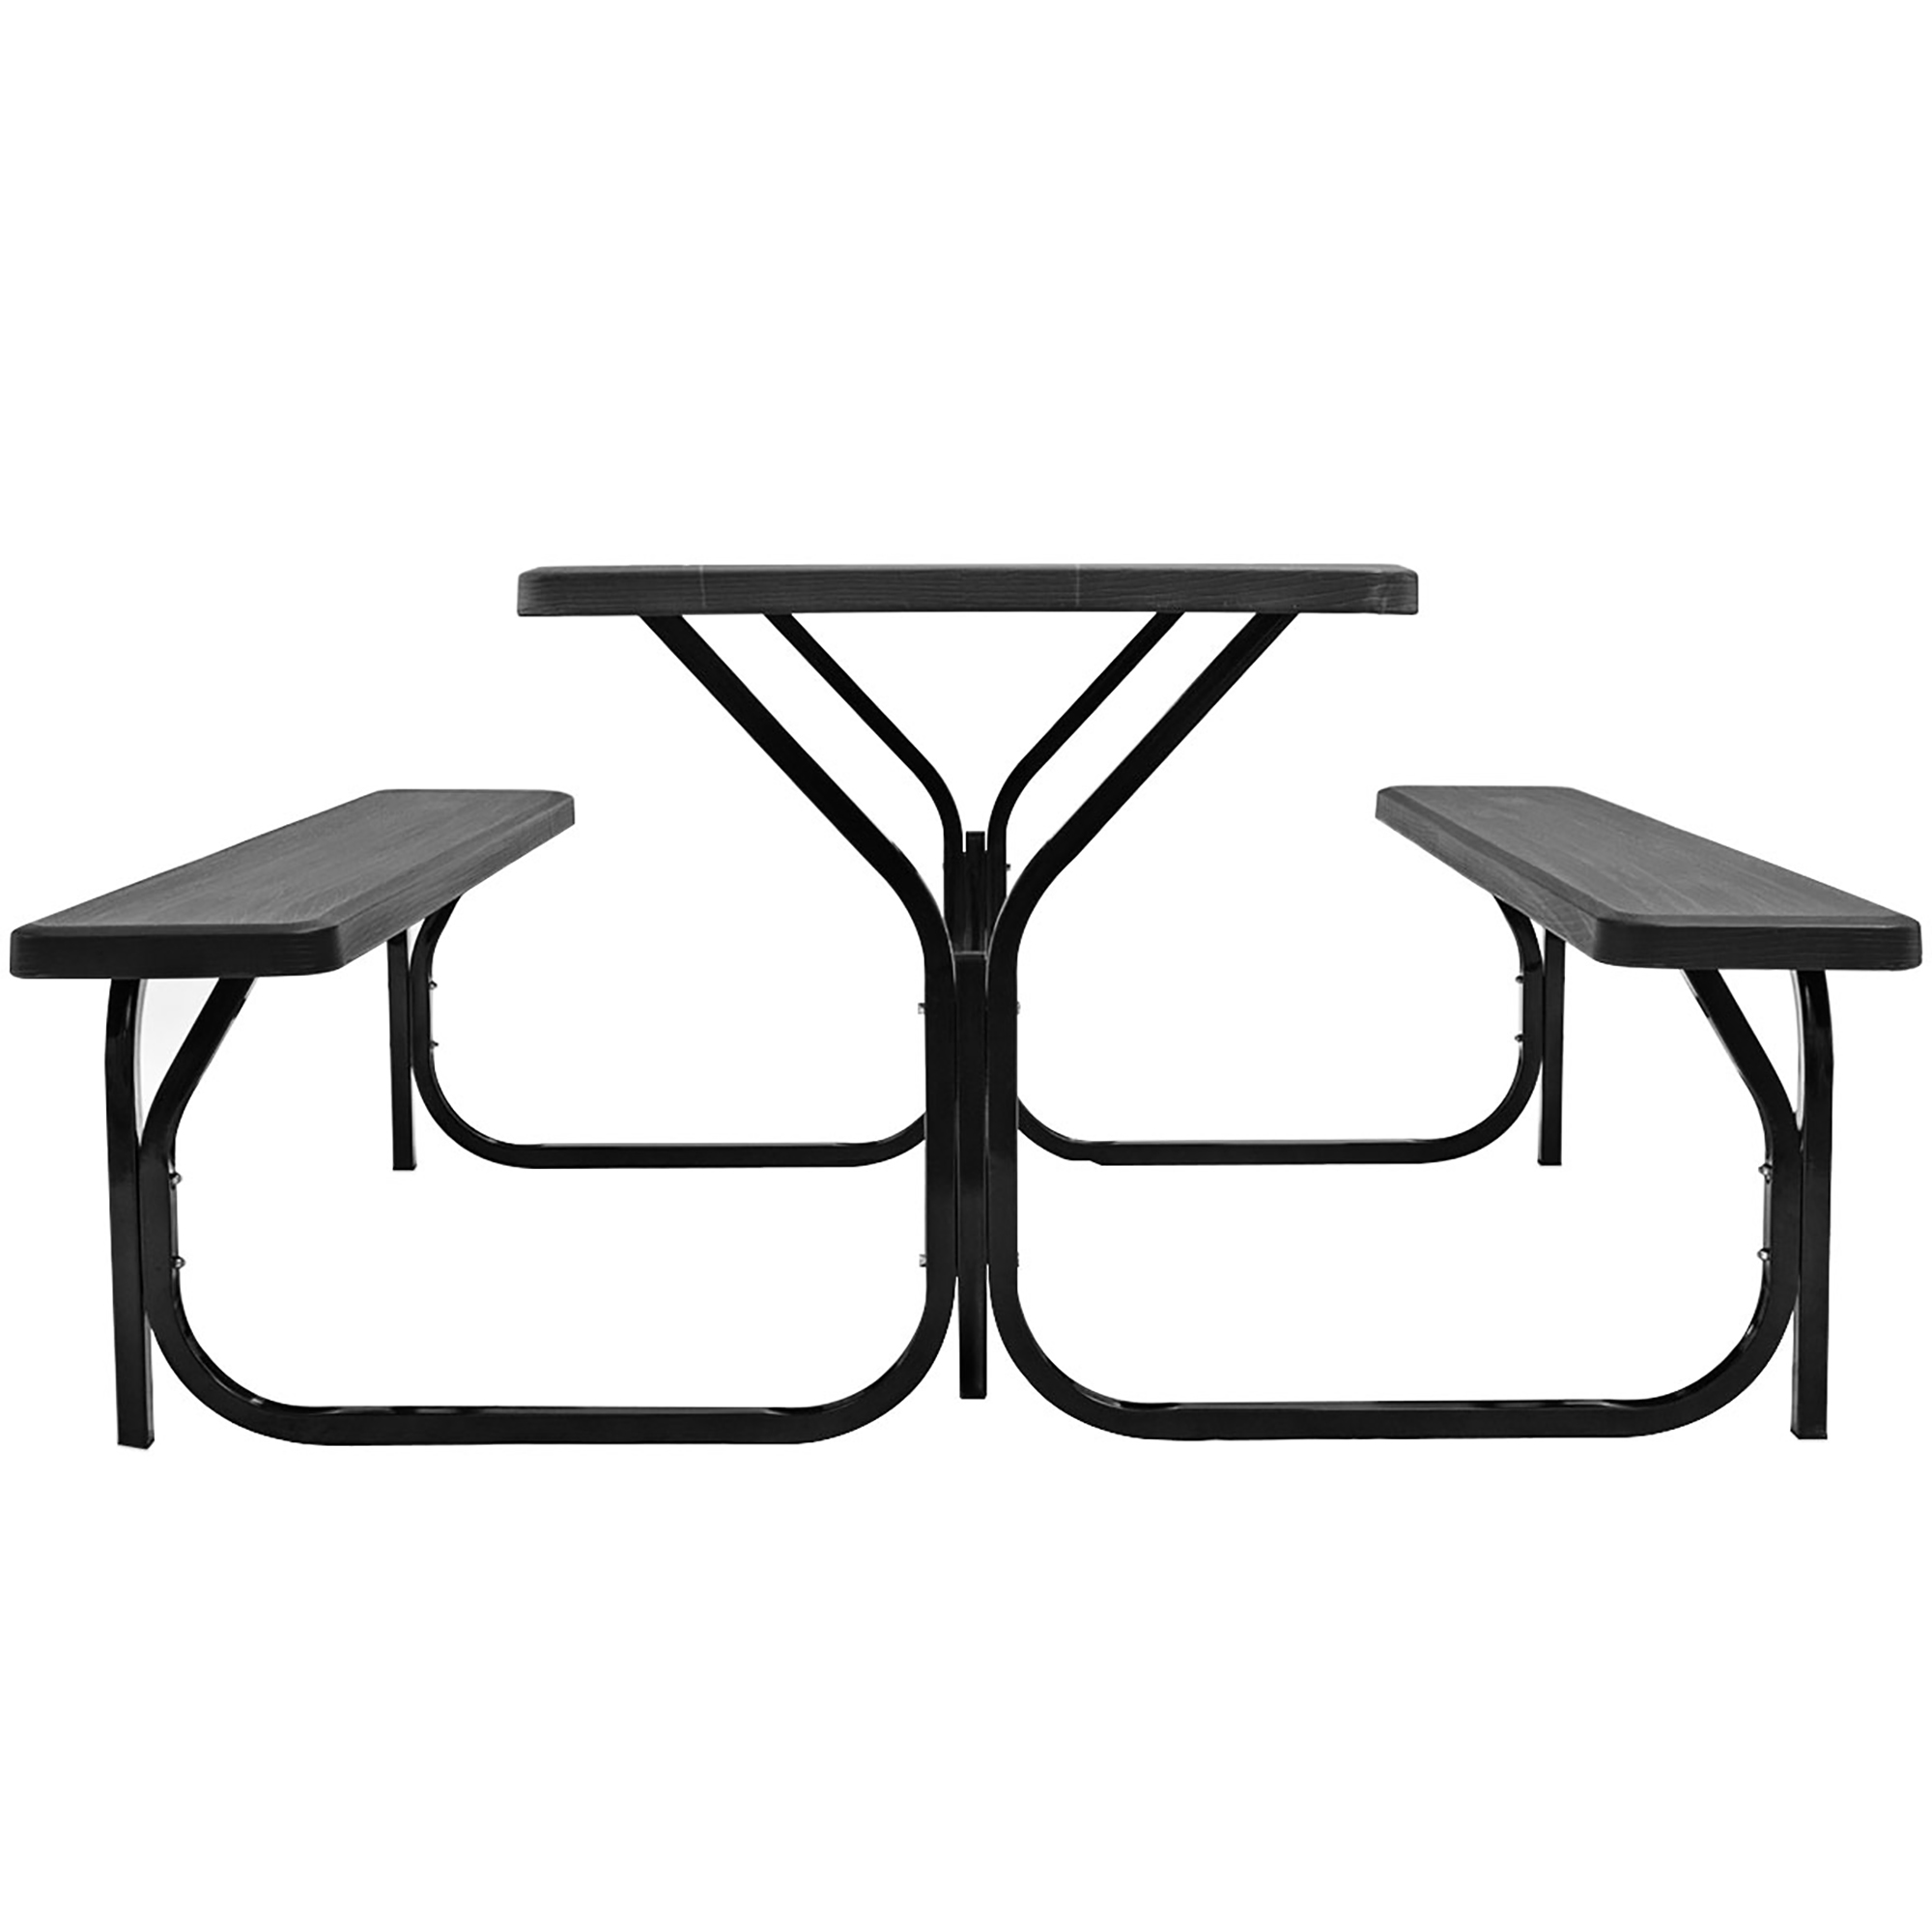 Costway Picnic Table Bench Set Outdoor Backyard Iron Patio Garden Party Dining All Weather Black - image 4 of 8